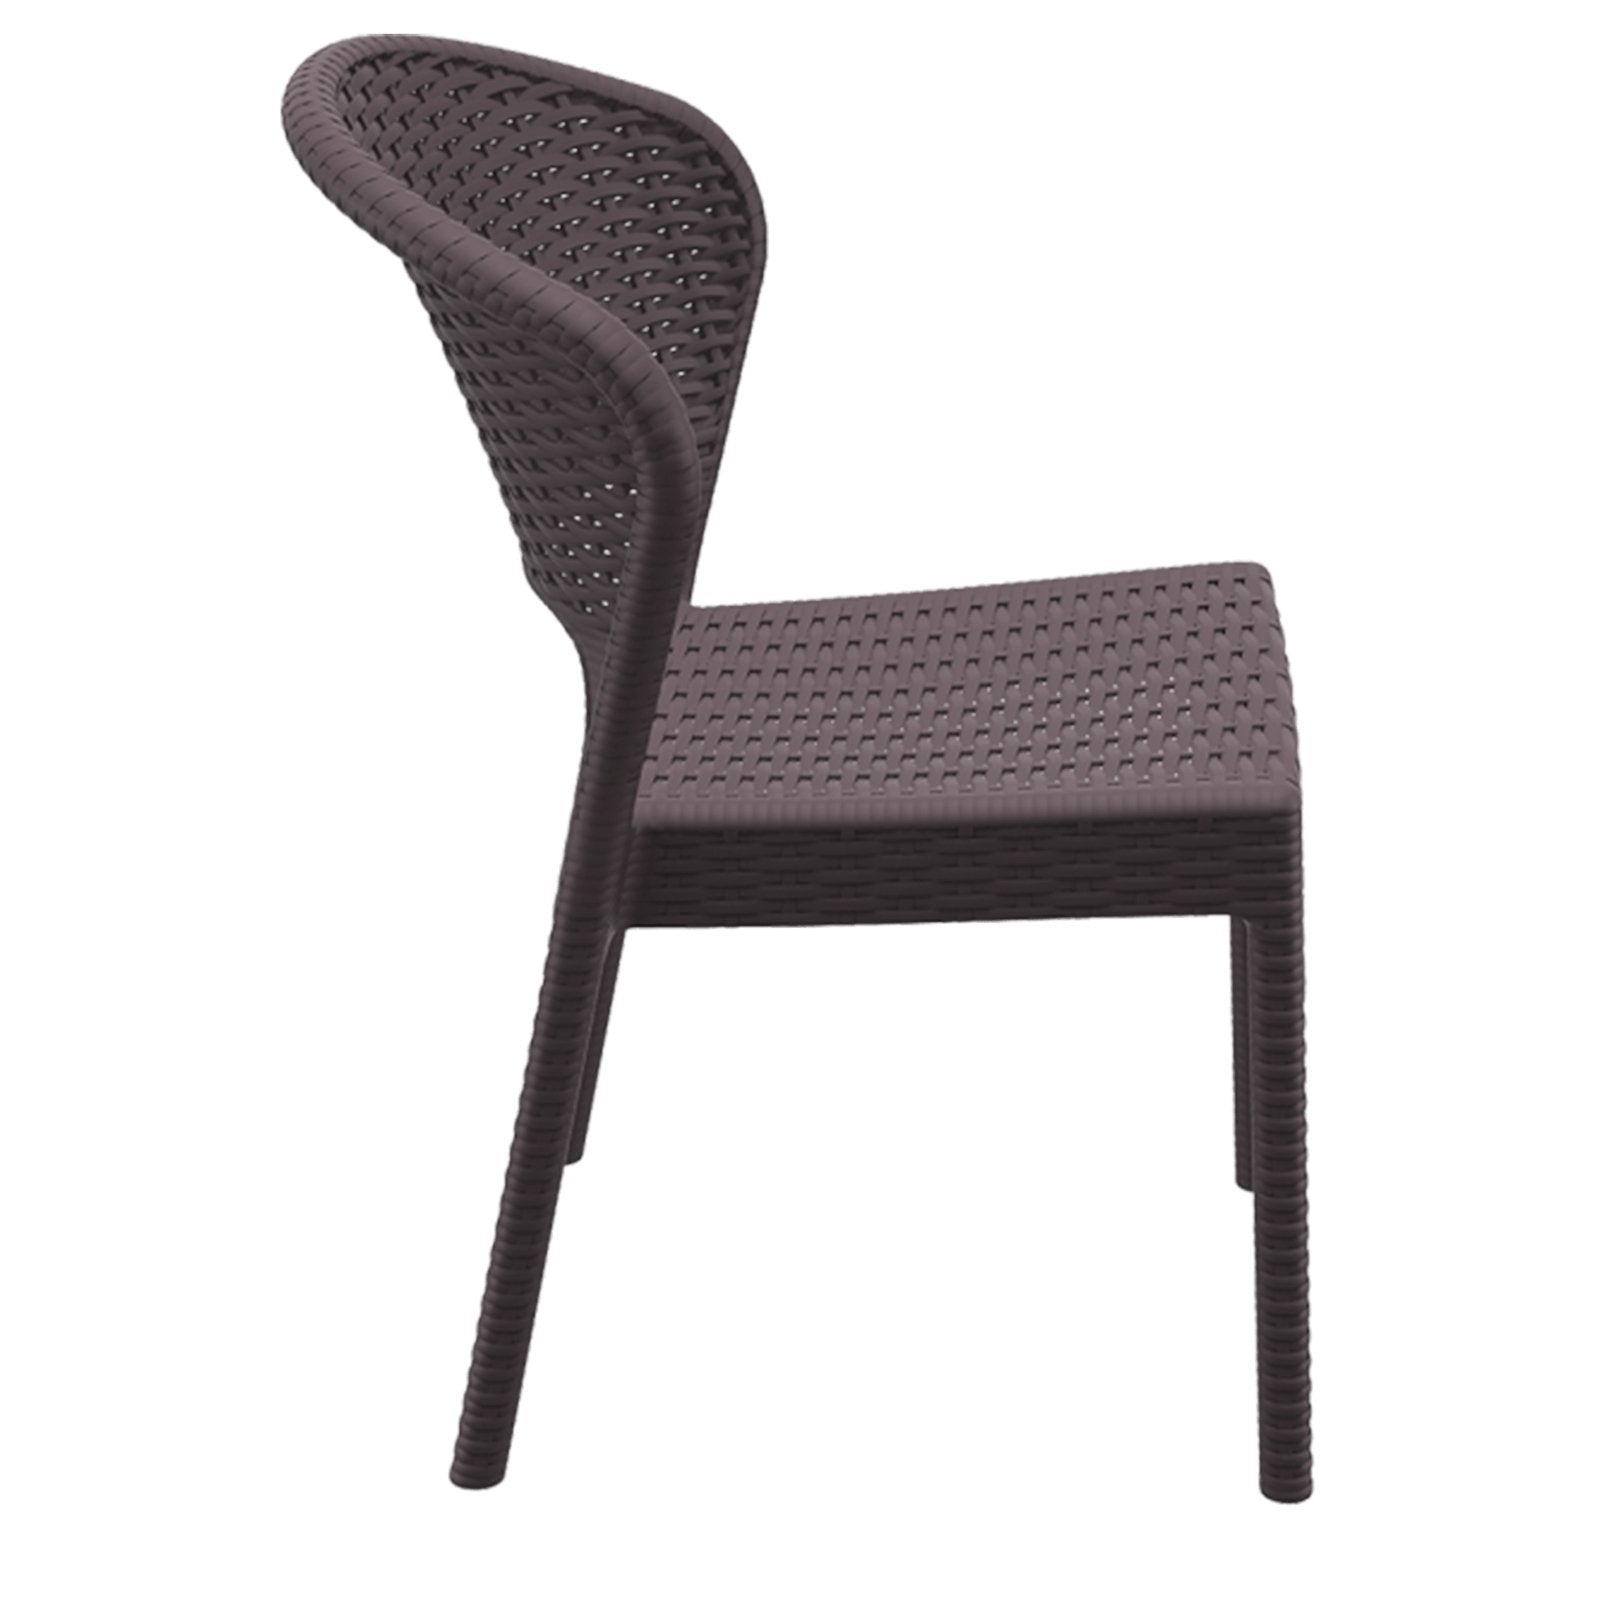 Clovelly | Coastal, Stackable, Plastic Outdoor Dining Chairs | Set Of 2 | Chocolate